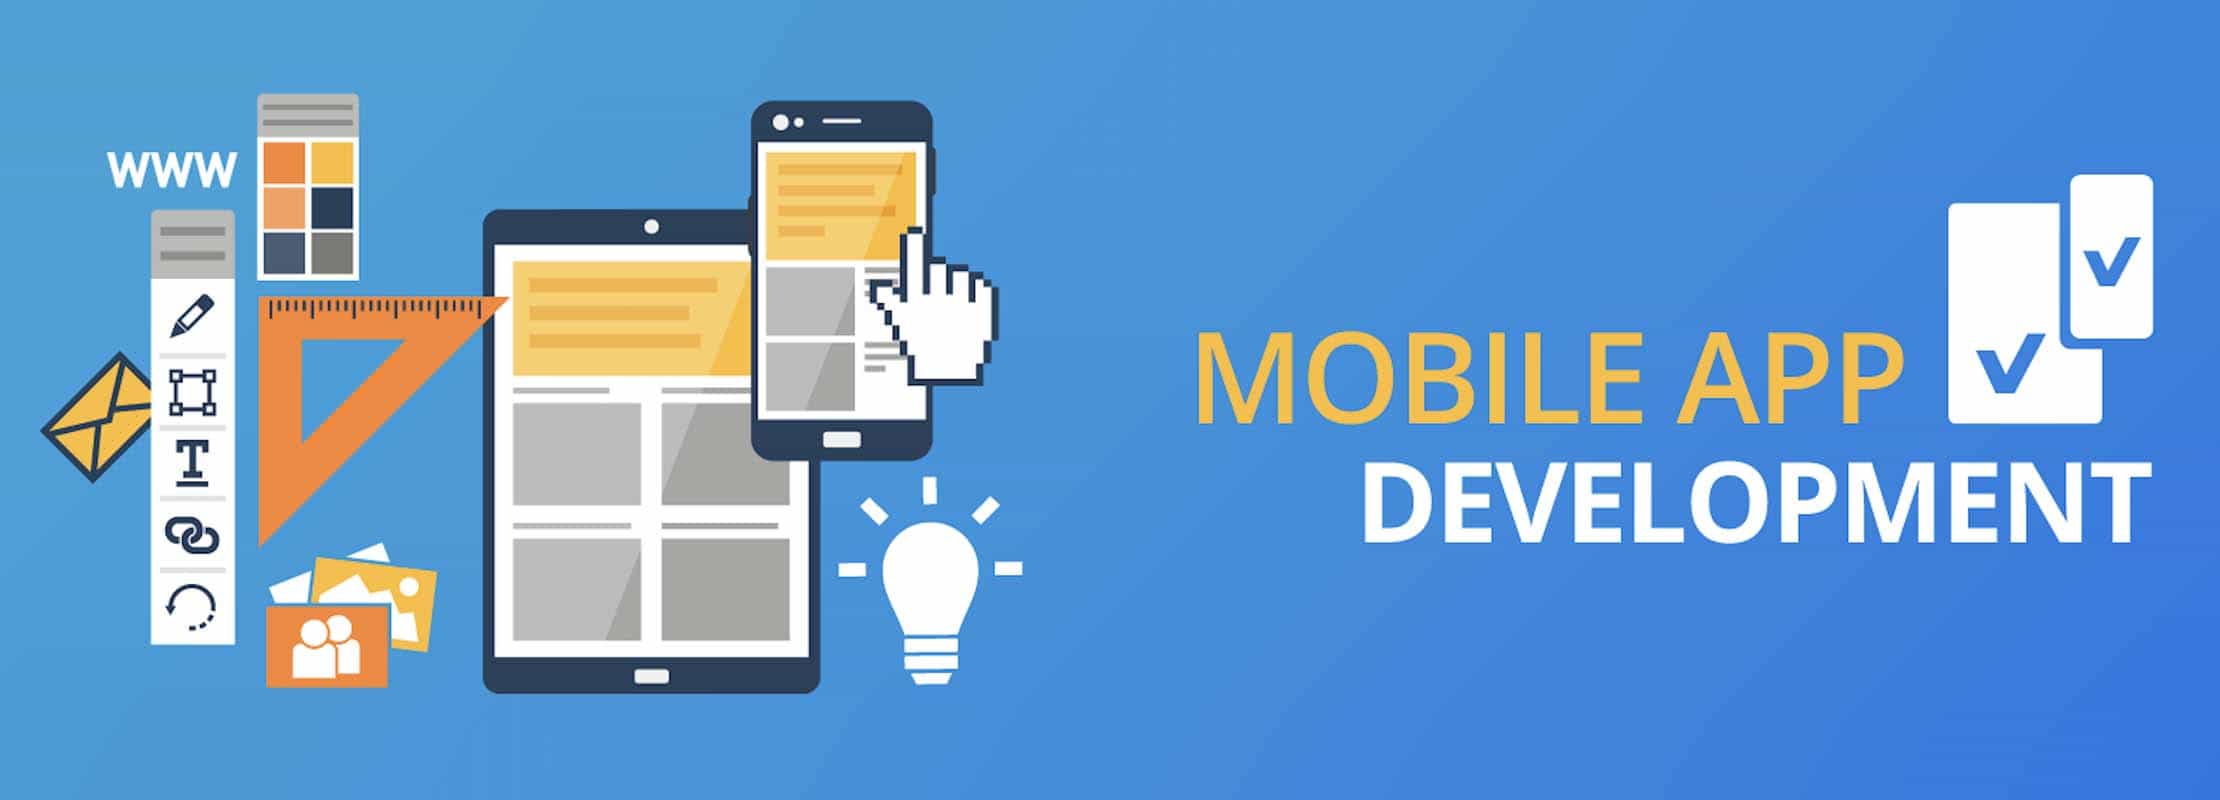 different mobile phones,bulb,tools,mobile app development as heading|web design company in kerala